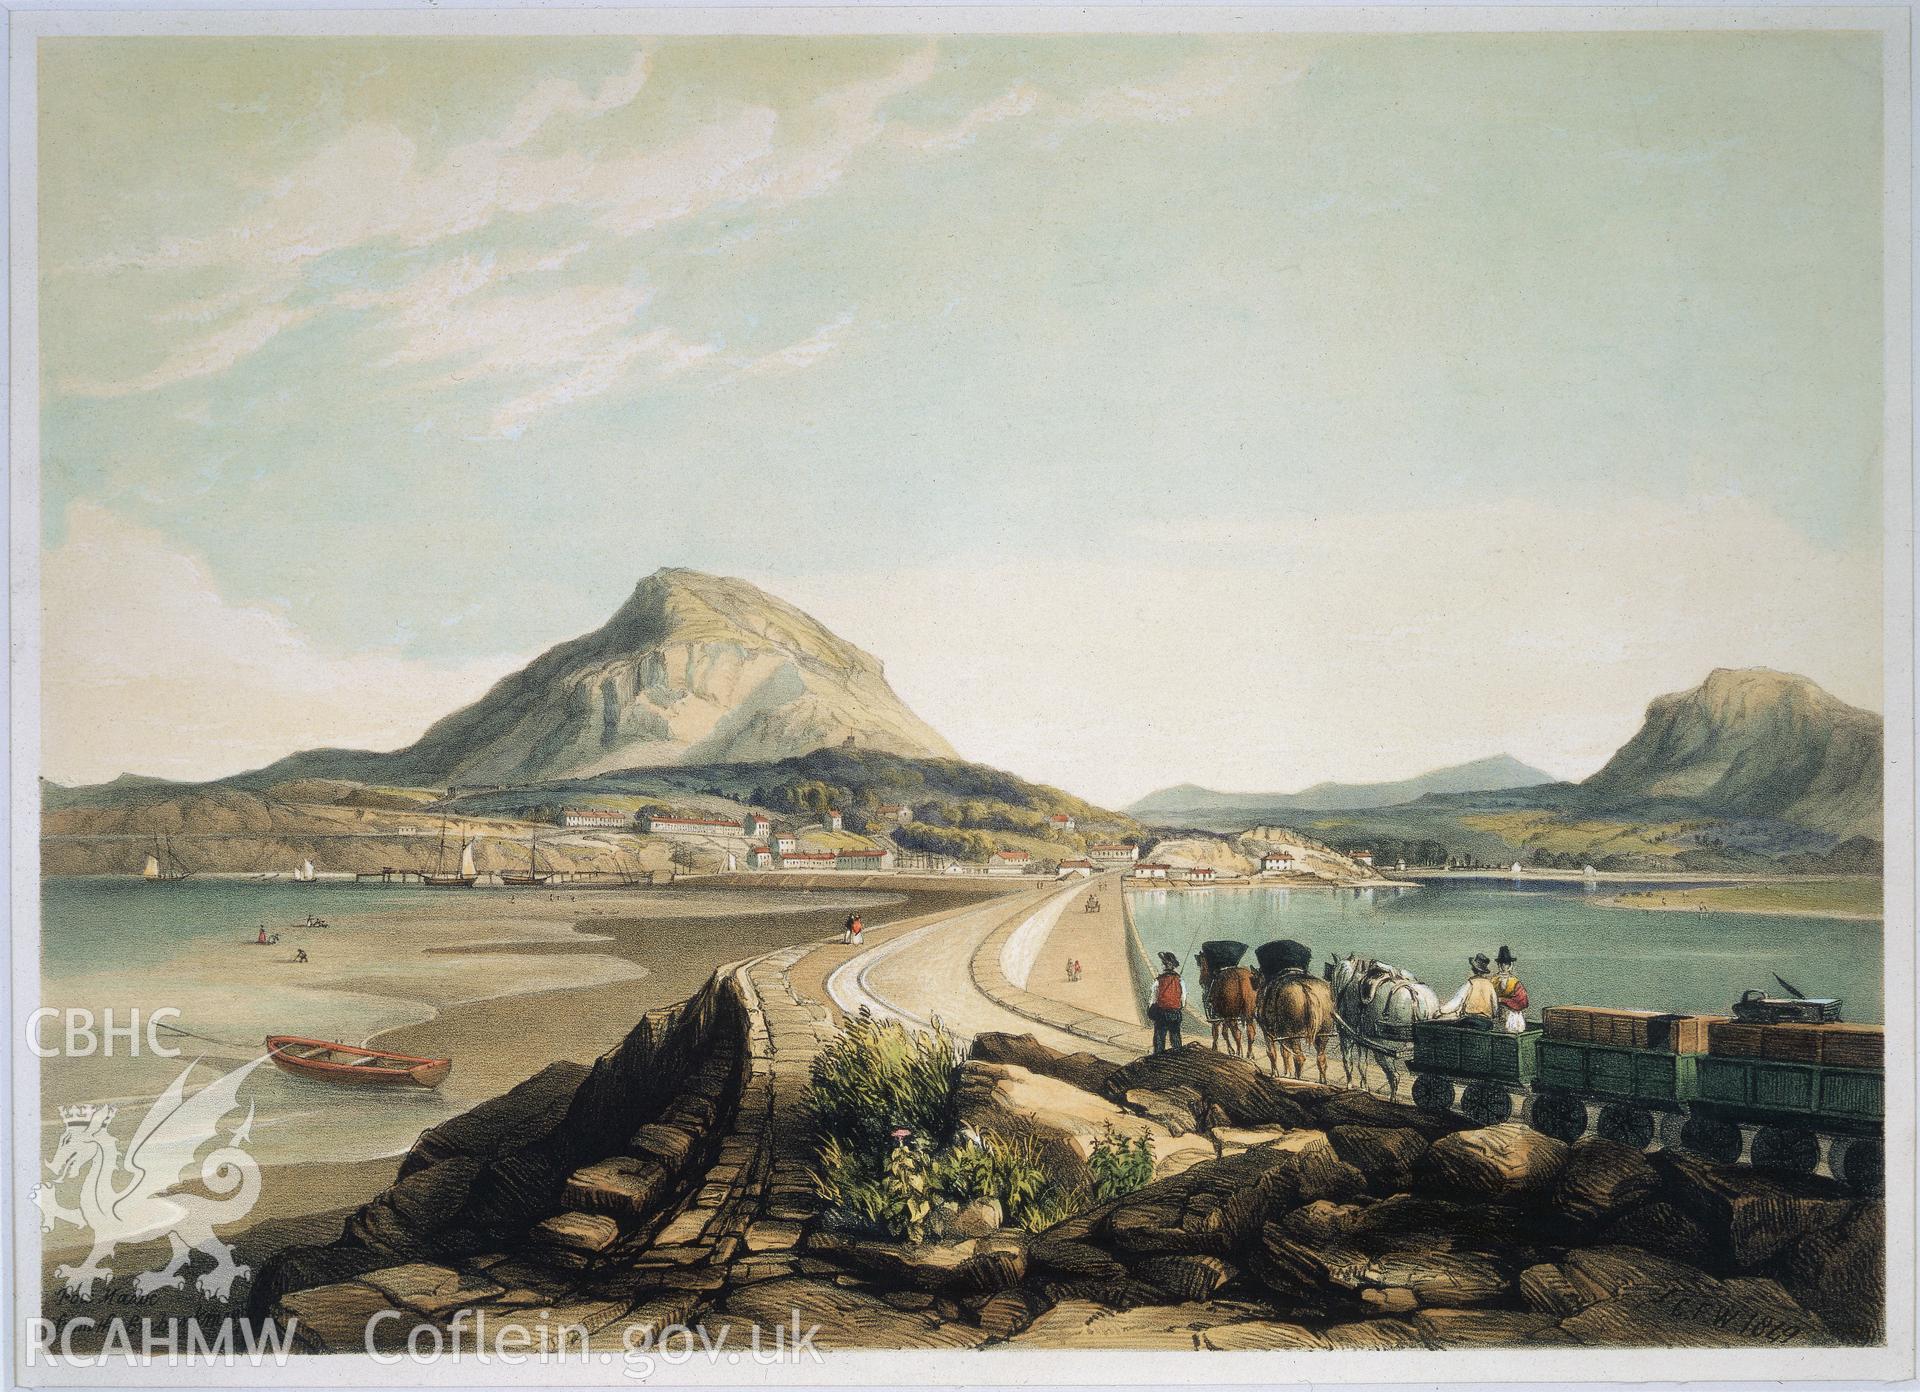 RCAHMW colour transparency showing painting of Traeth Mawr Causeway.